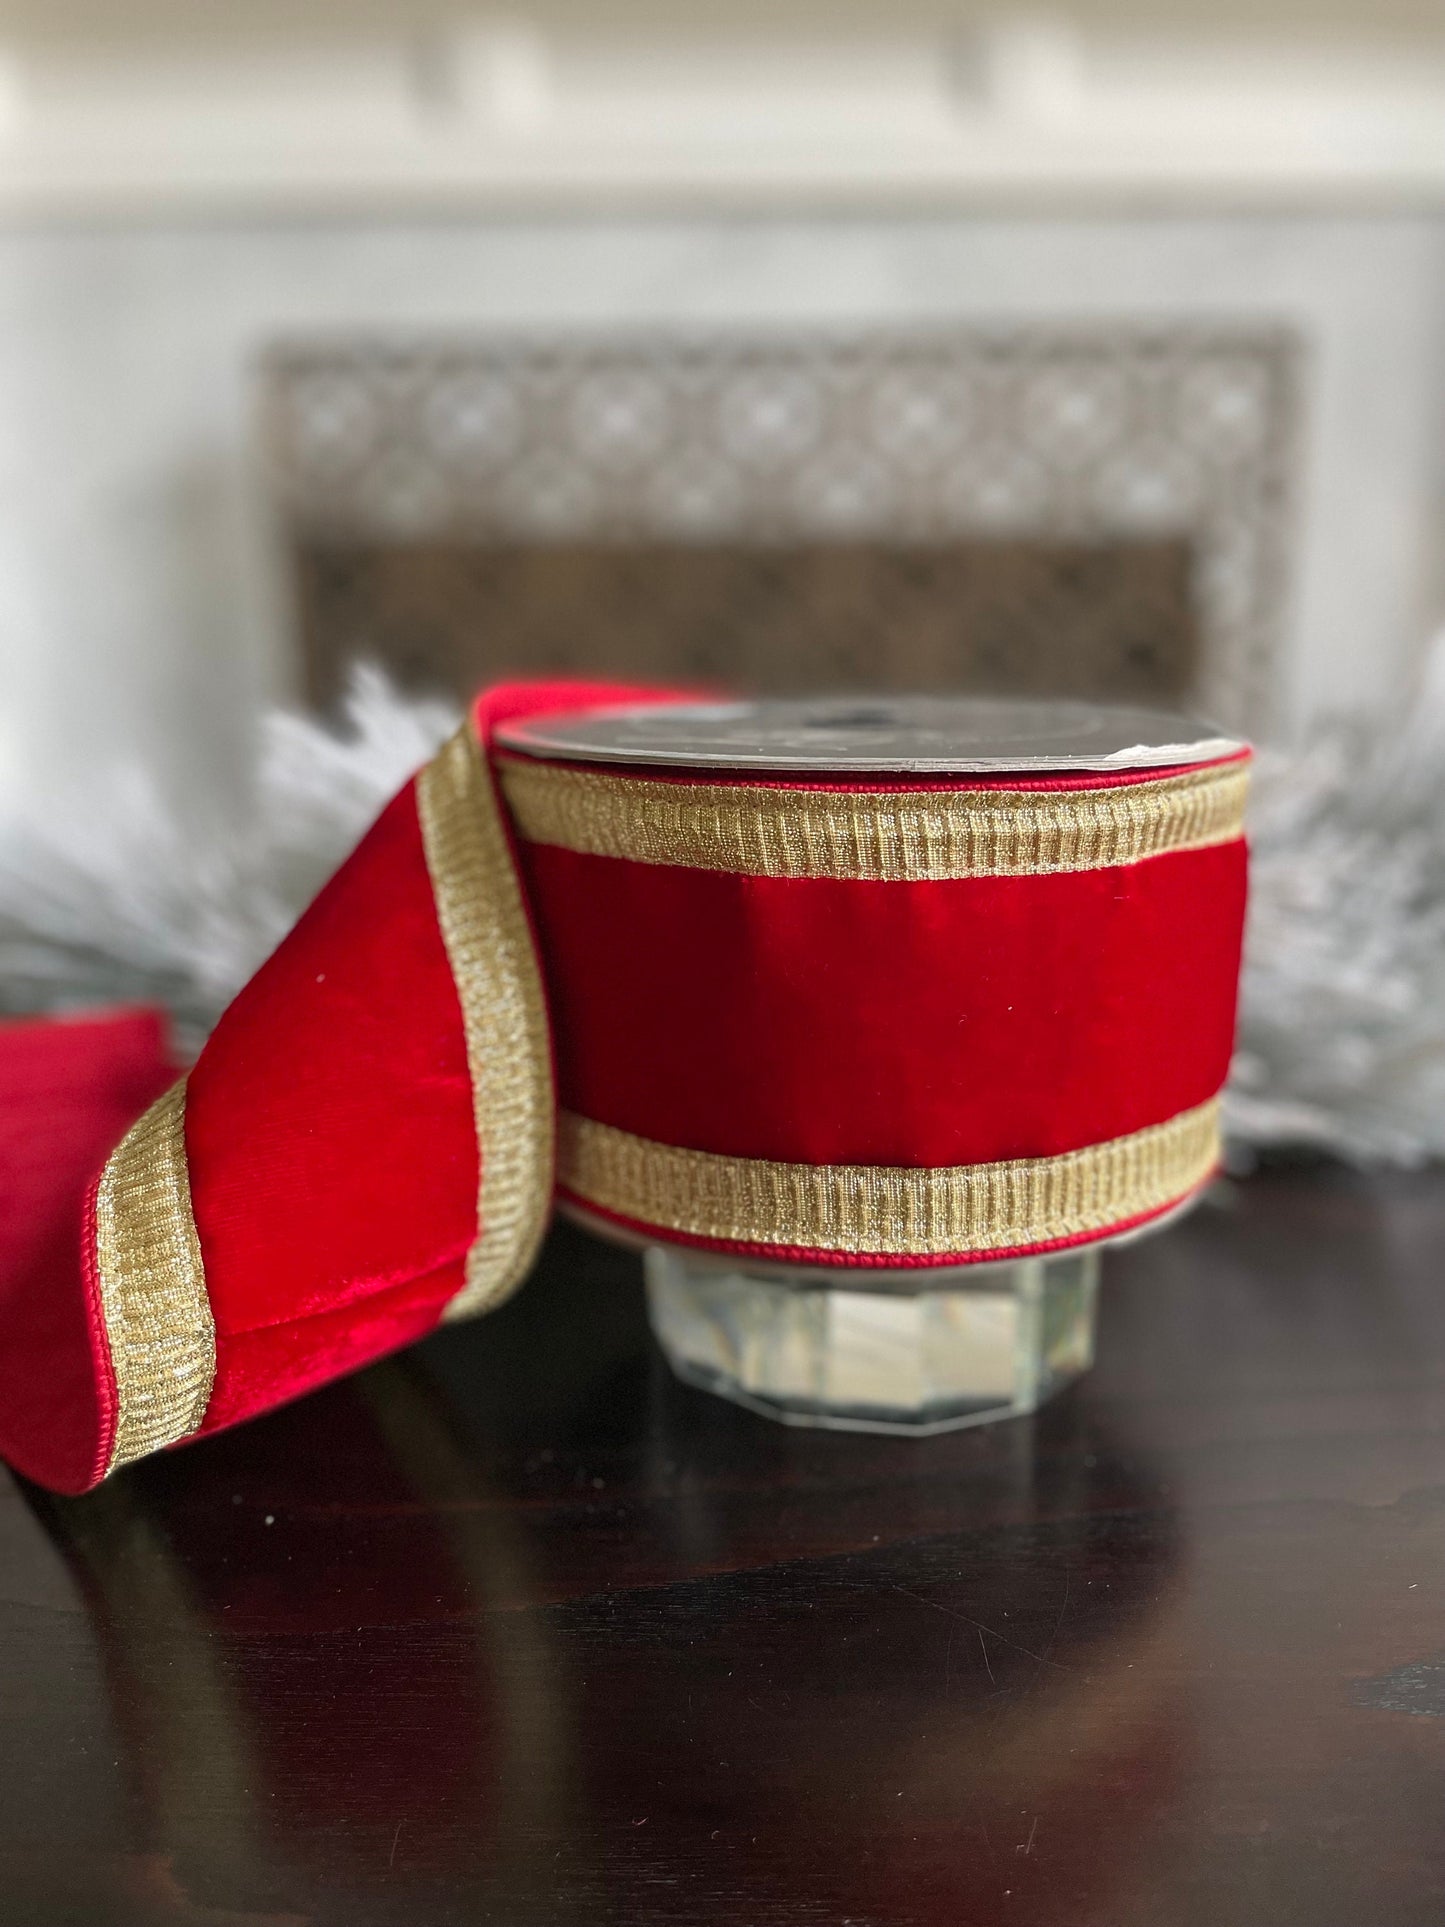 4” x 10 yds Designer pleated borders ribbon, red velvet ribbon with gold borders. Wired. Farrisilk.